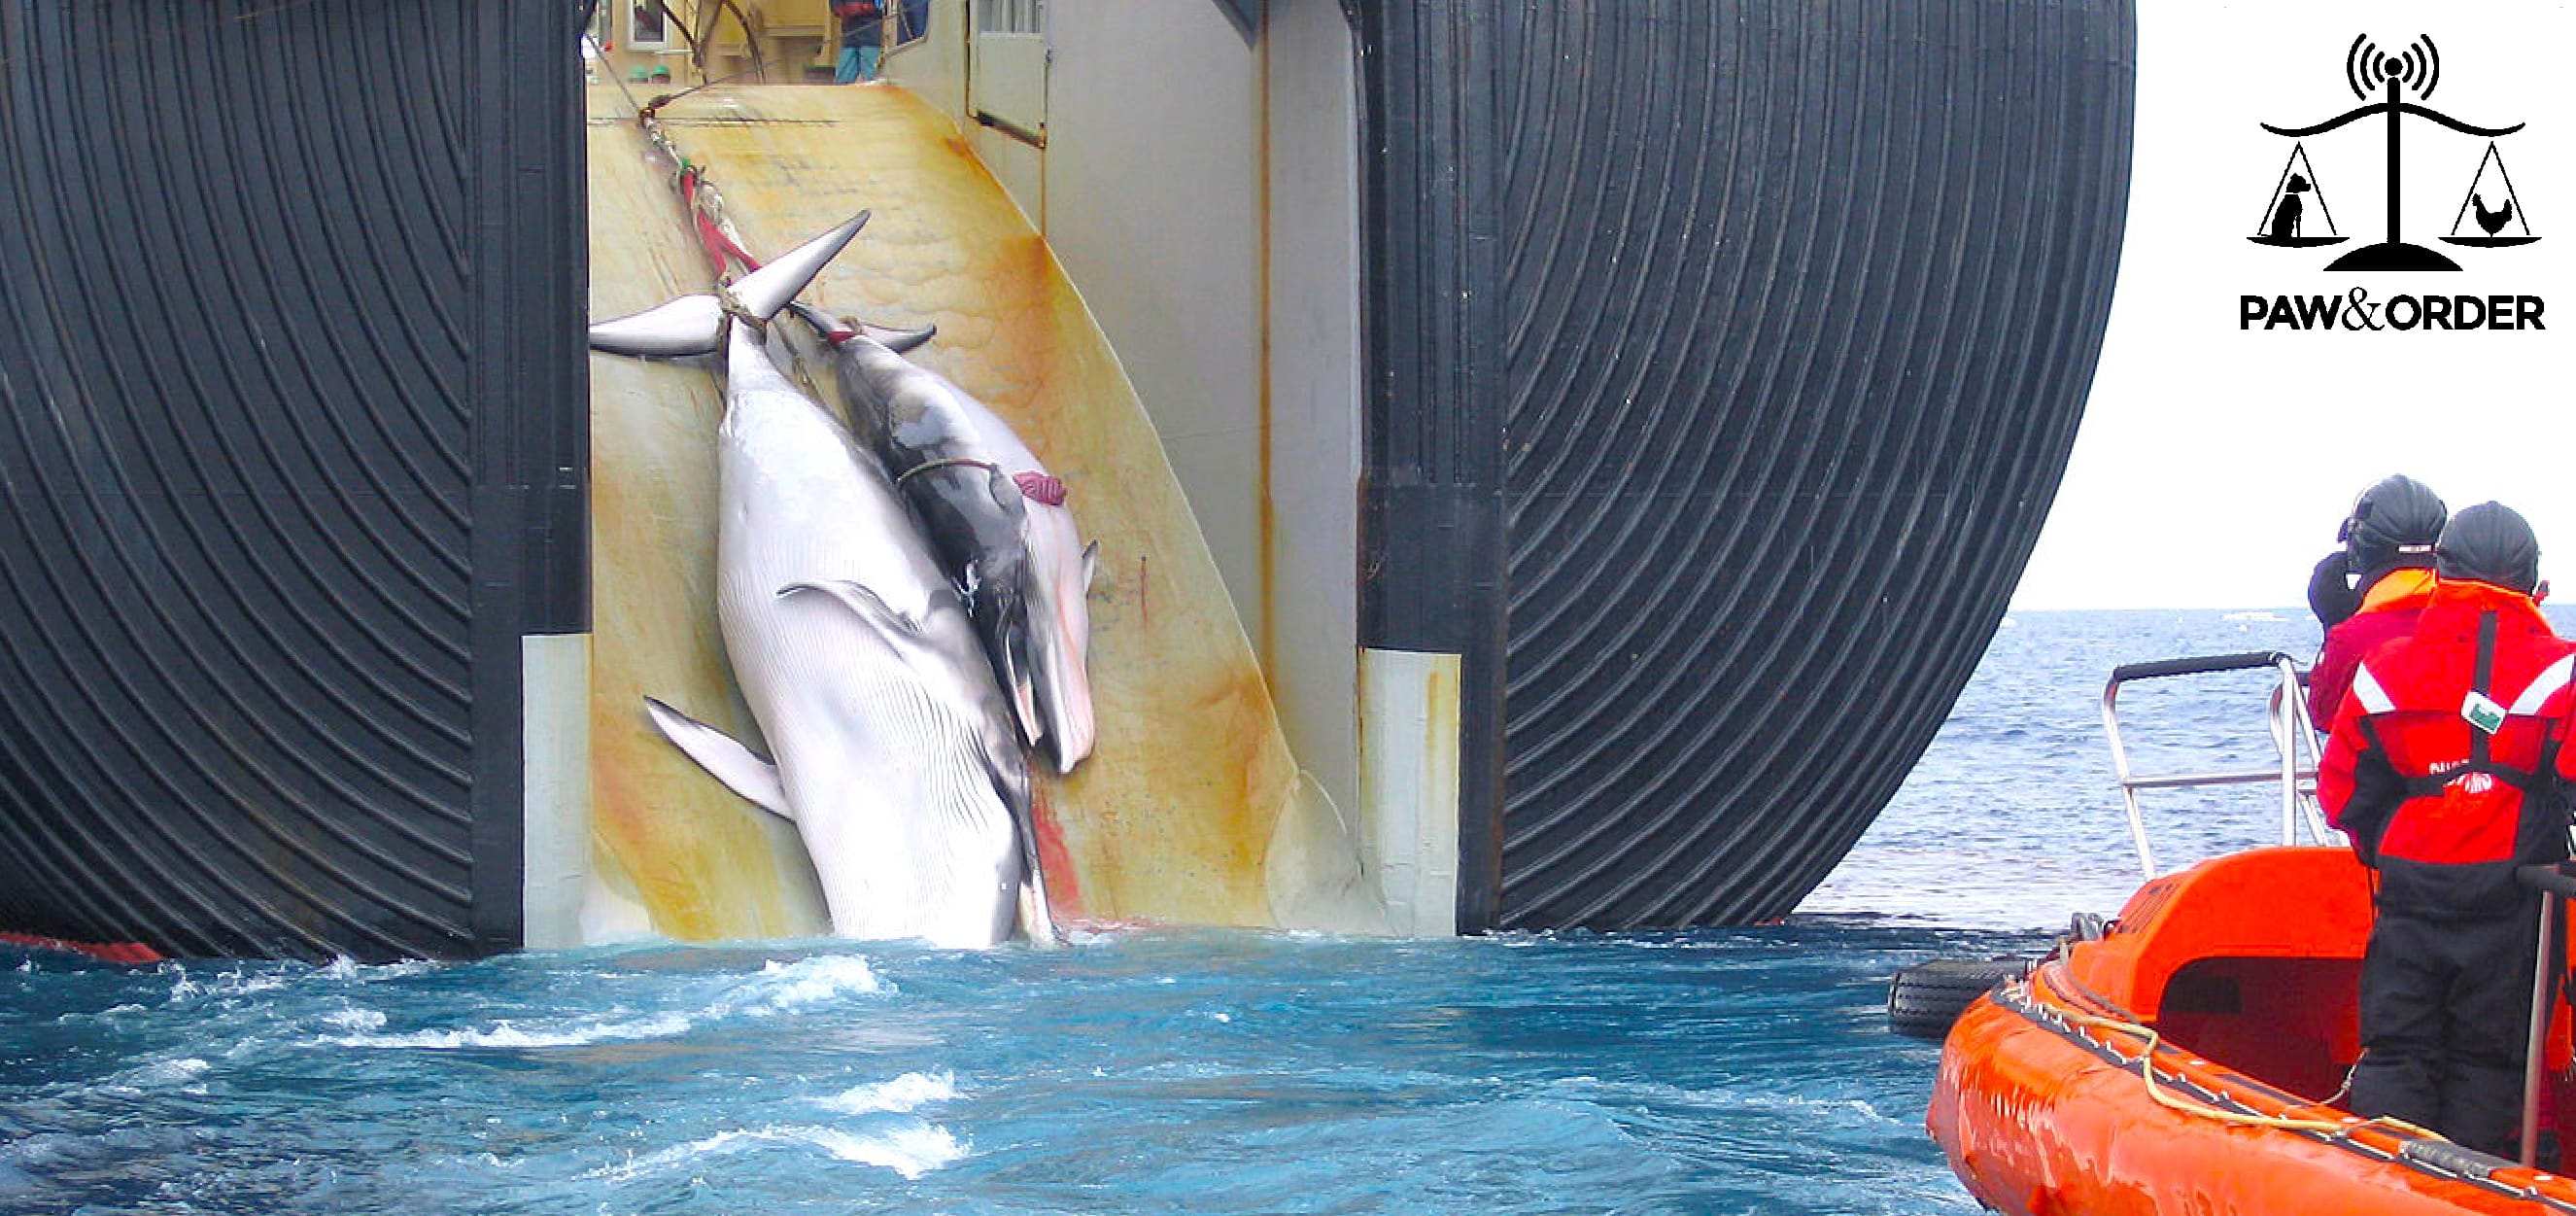 #25: Japan Leaves International Whaling Commission to Harpoon More Whales